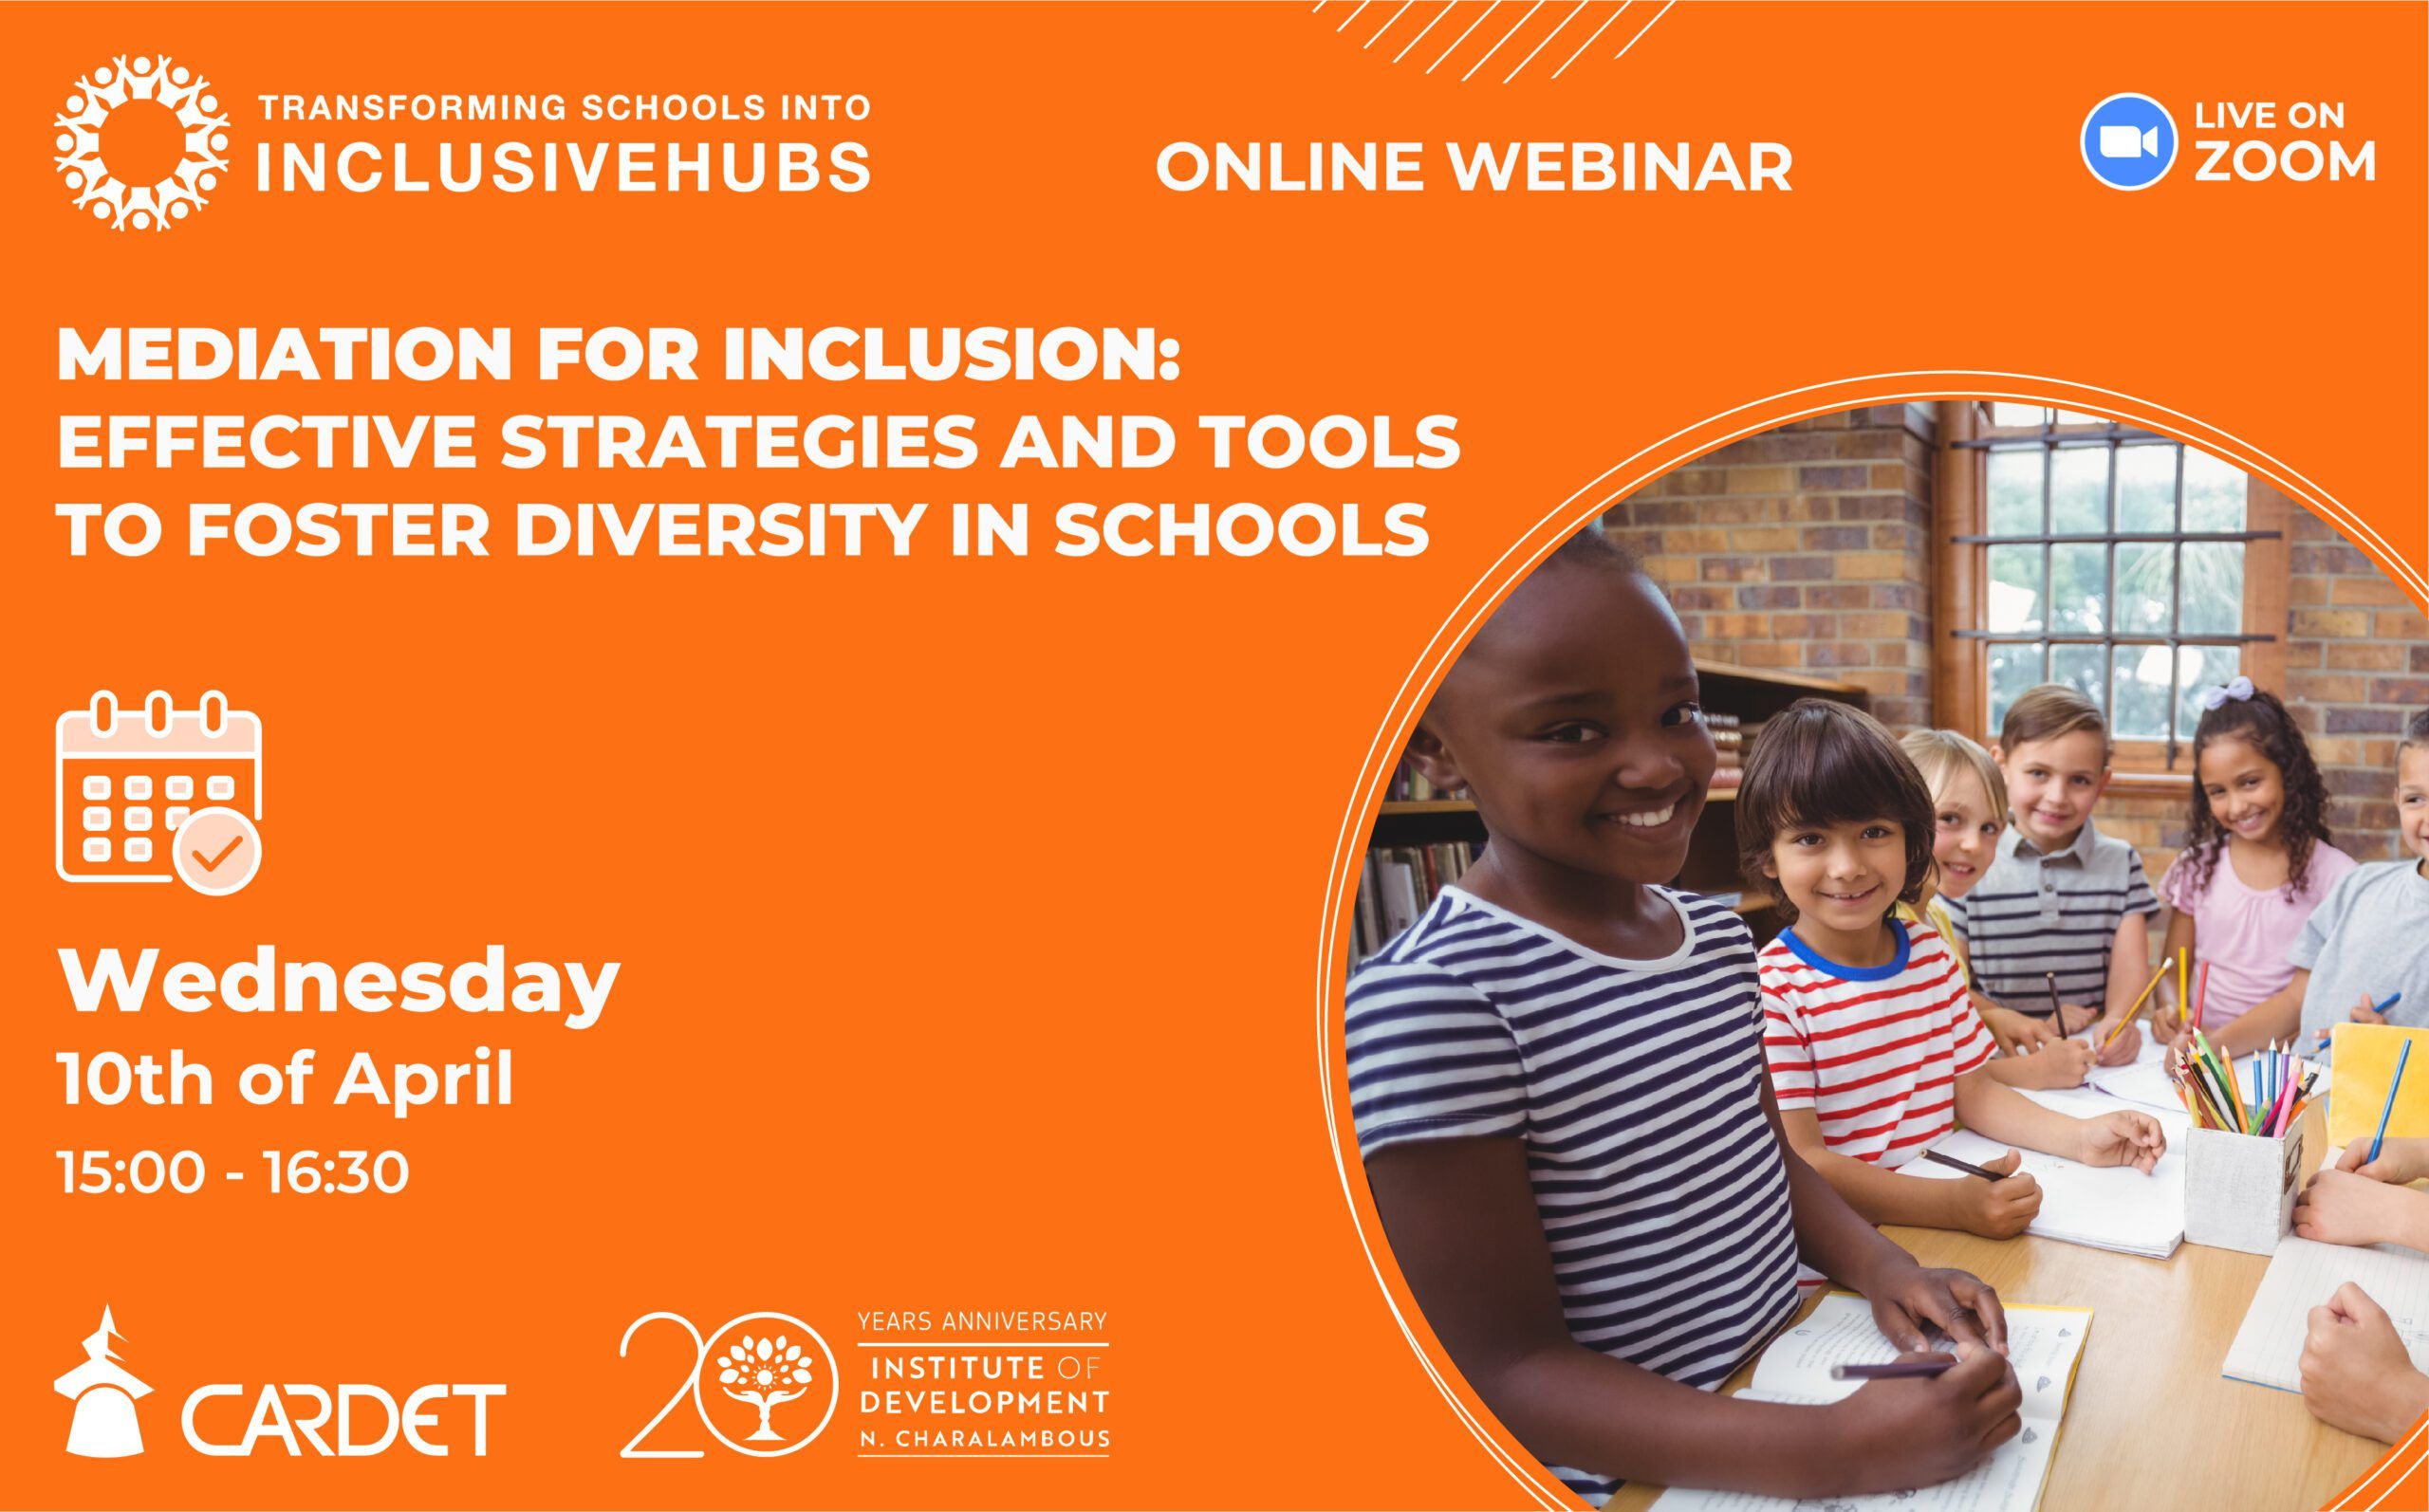 Webinar “Mediation for Inclusion: Effective Strategies and Tools to Foster Diversity in Schools”